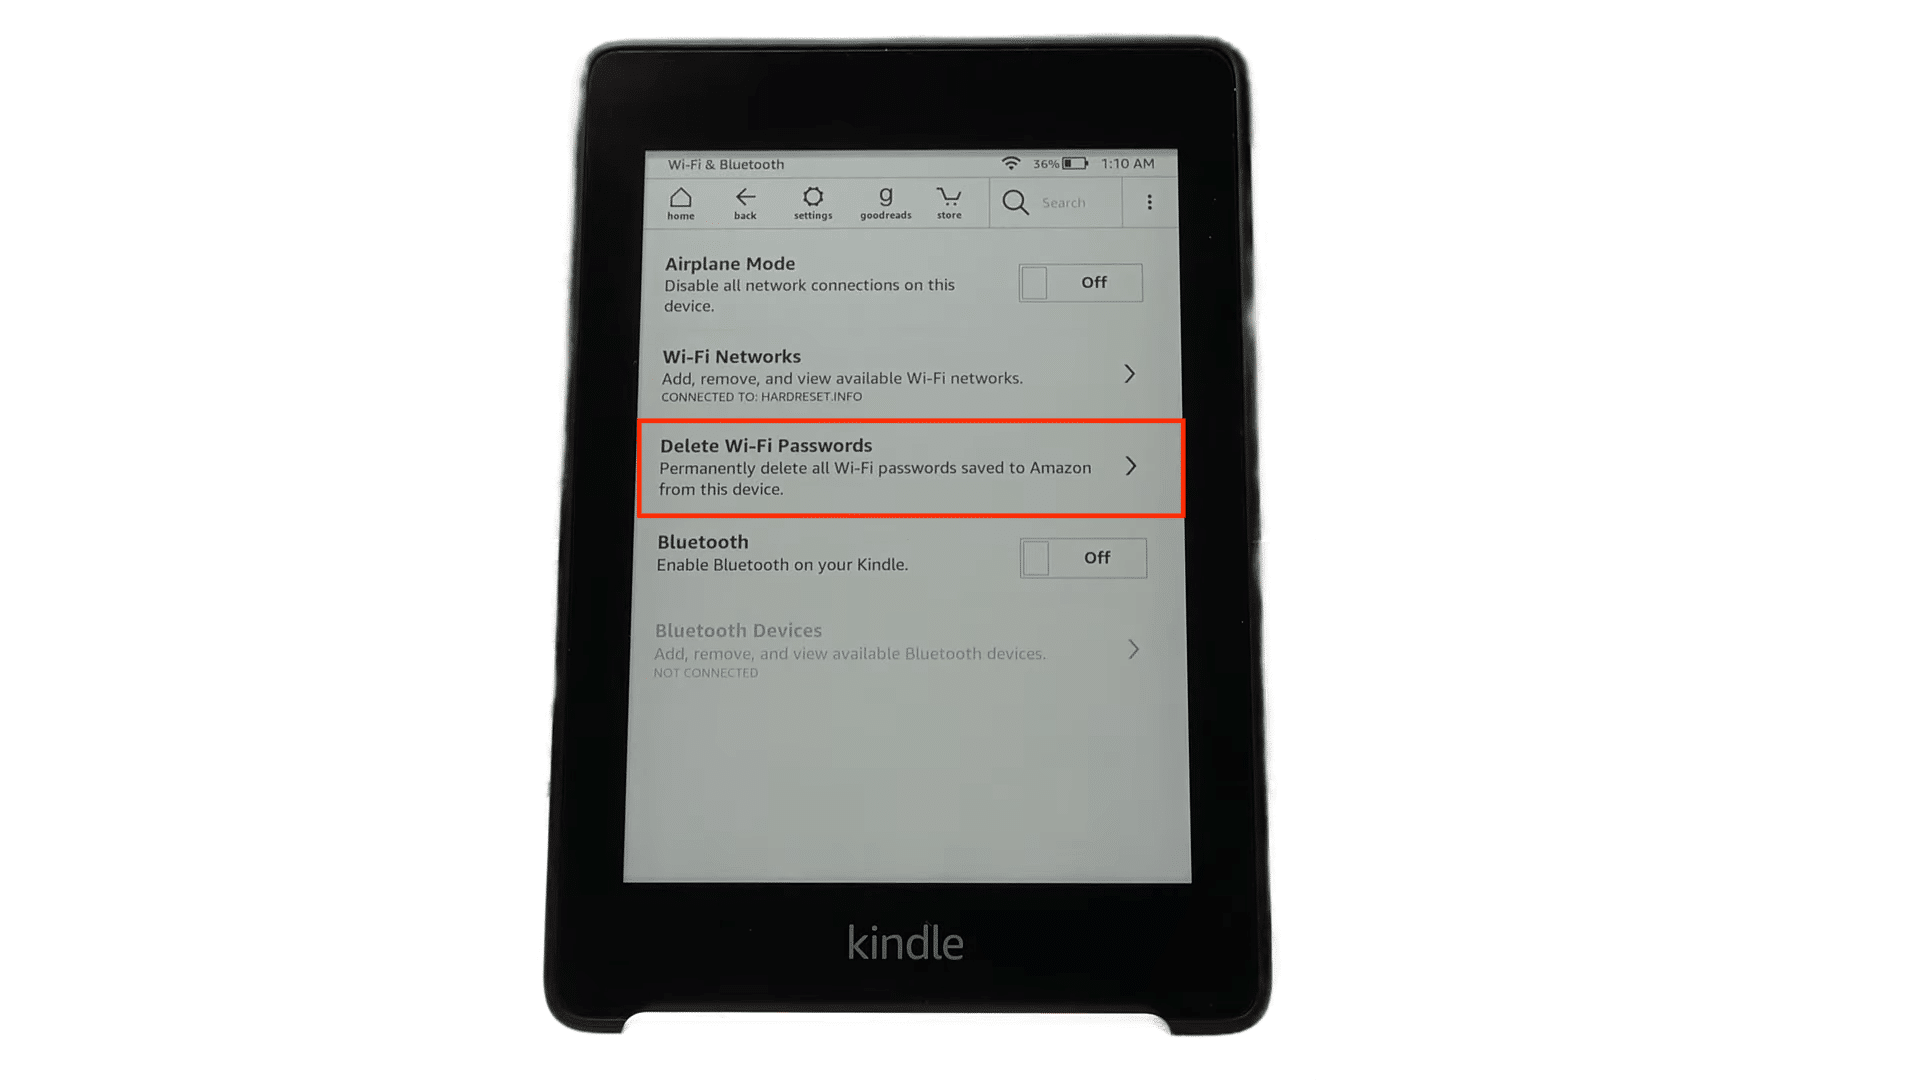 Delete All Wi-Fi Passwords in Kindle